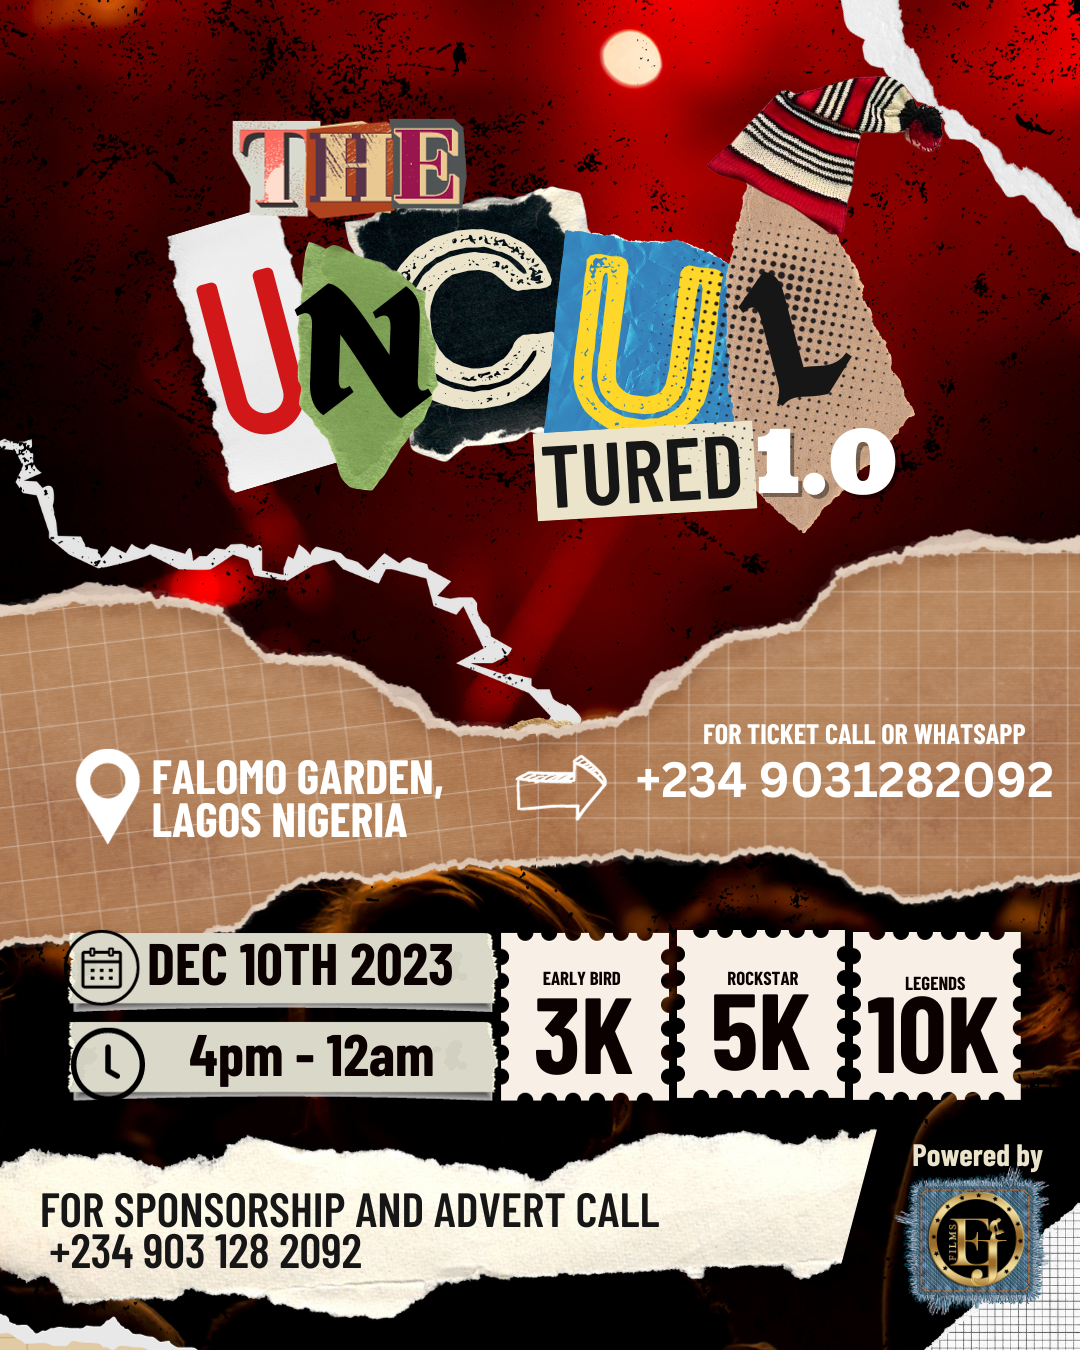 THE UNCULTURED 1.0 Post free event in Nigeria using tickethub.ng, buy and sell tickets to event